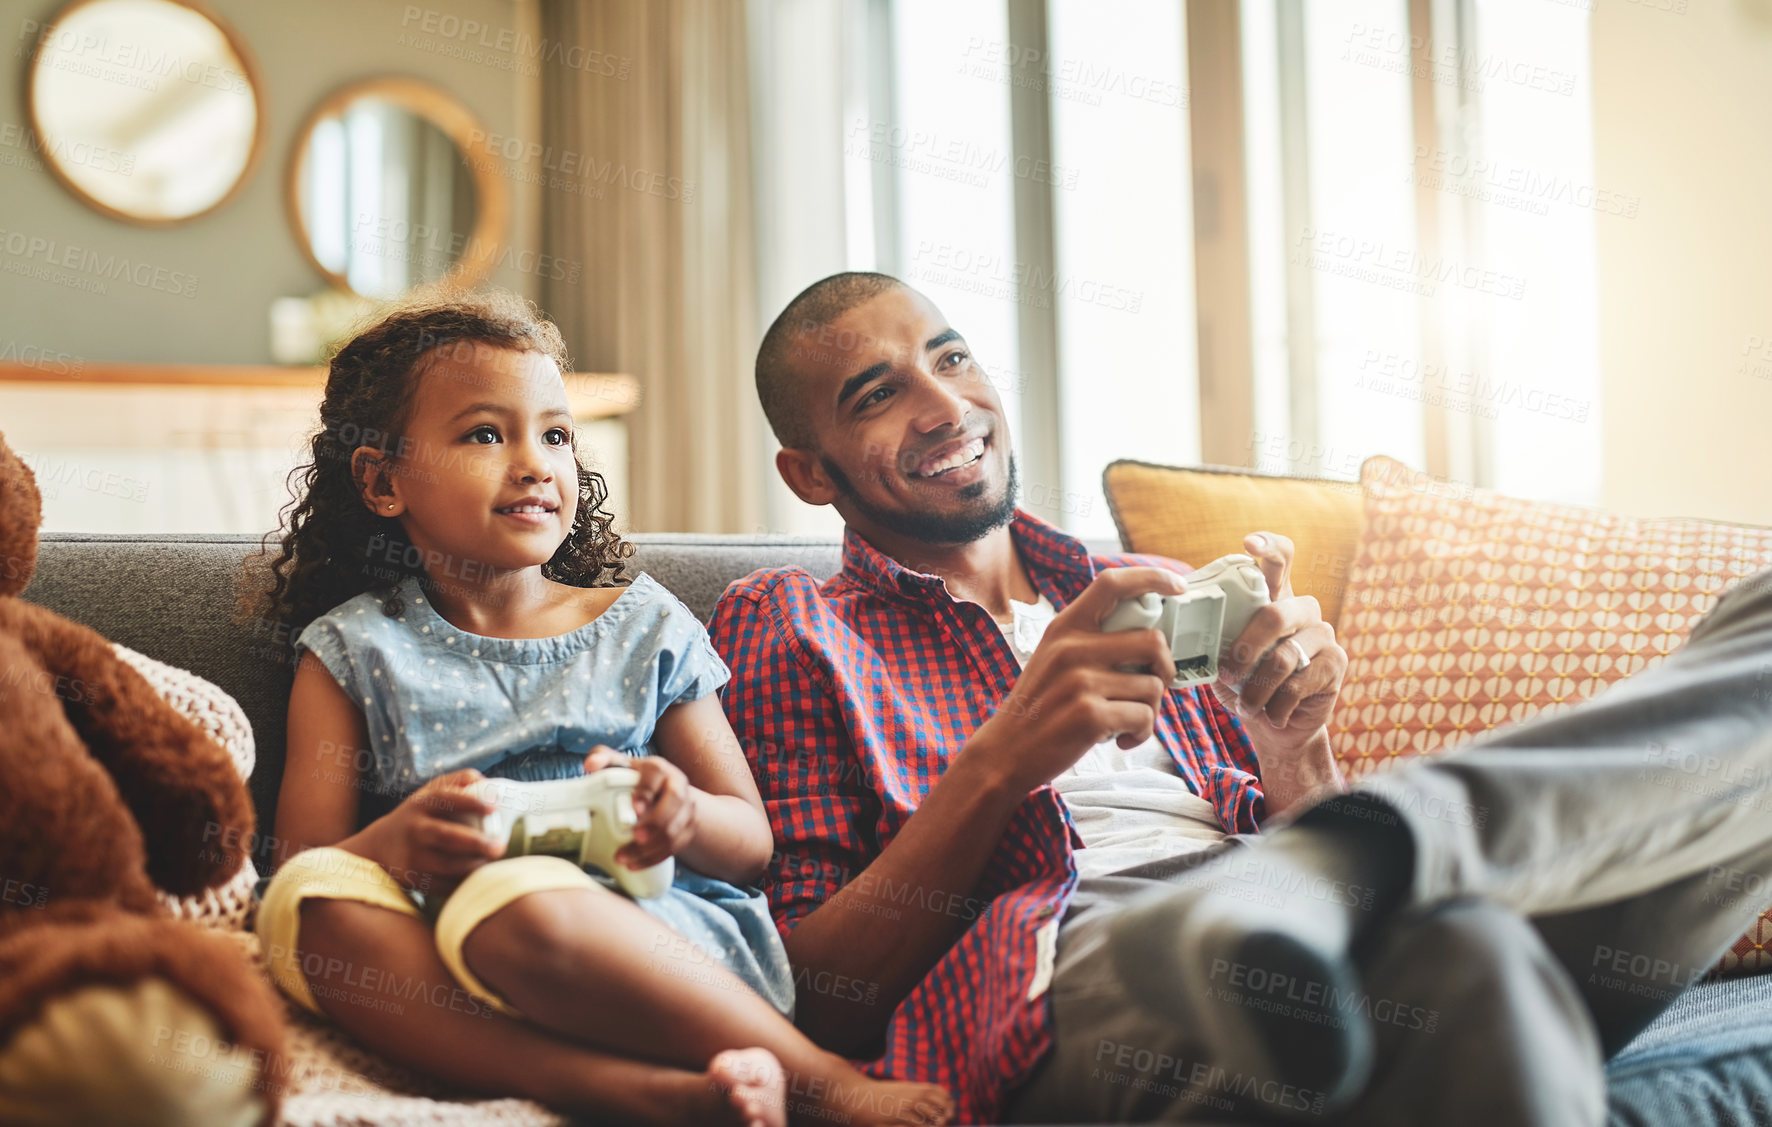 Buy stock photo Shot of an adorable little girl and her father playing video games together on the sofa at home